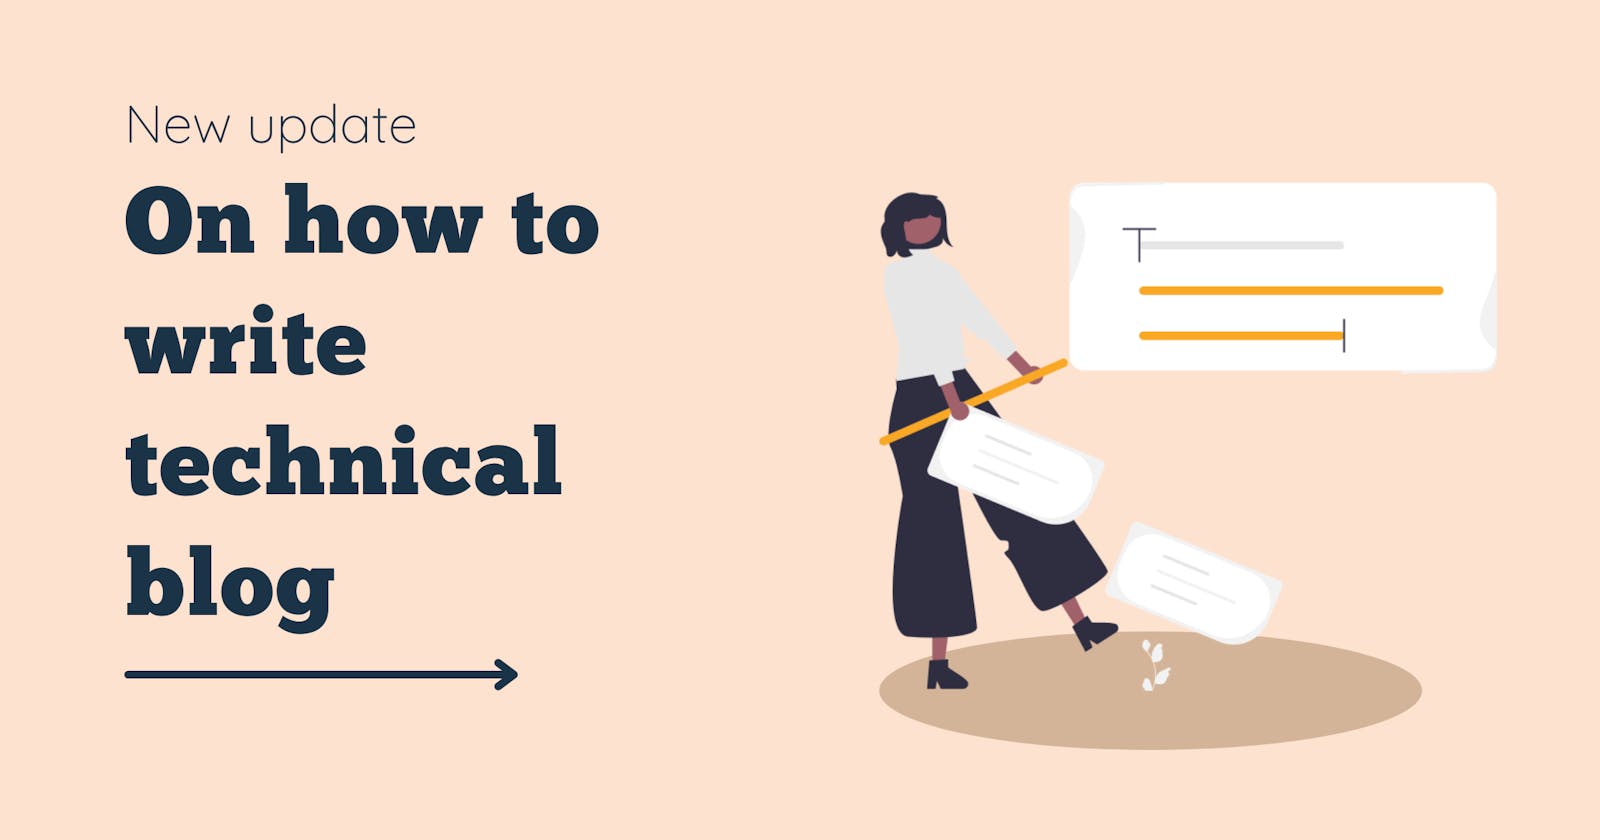 On how to write a technical blog